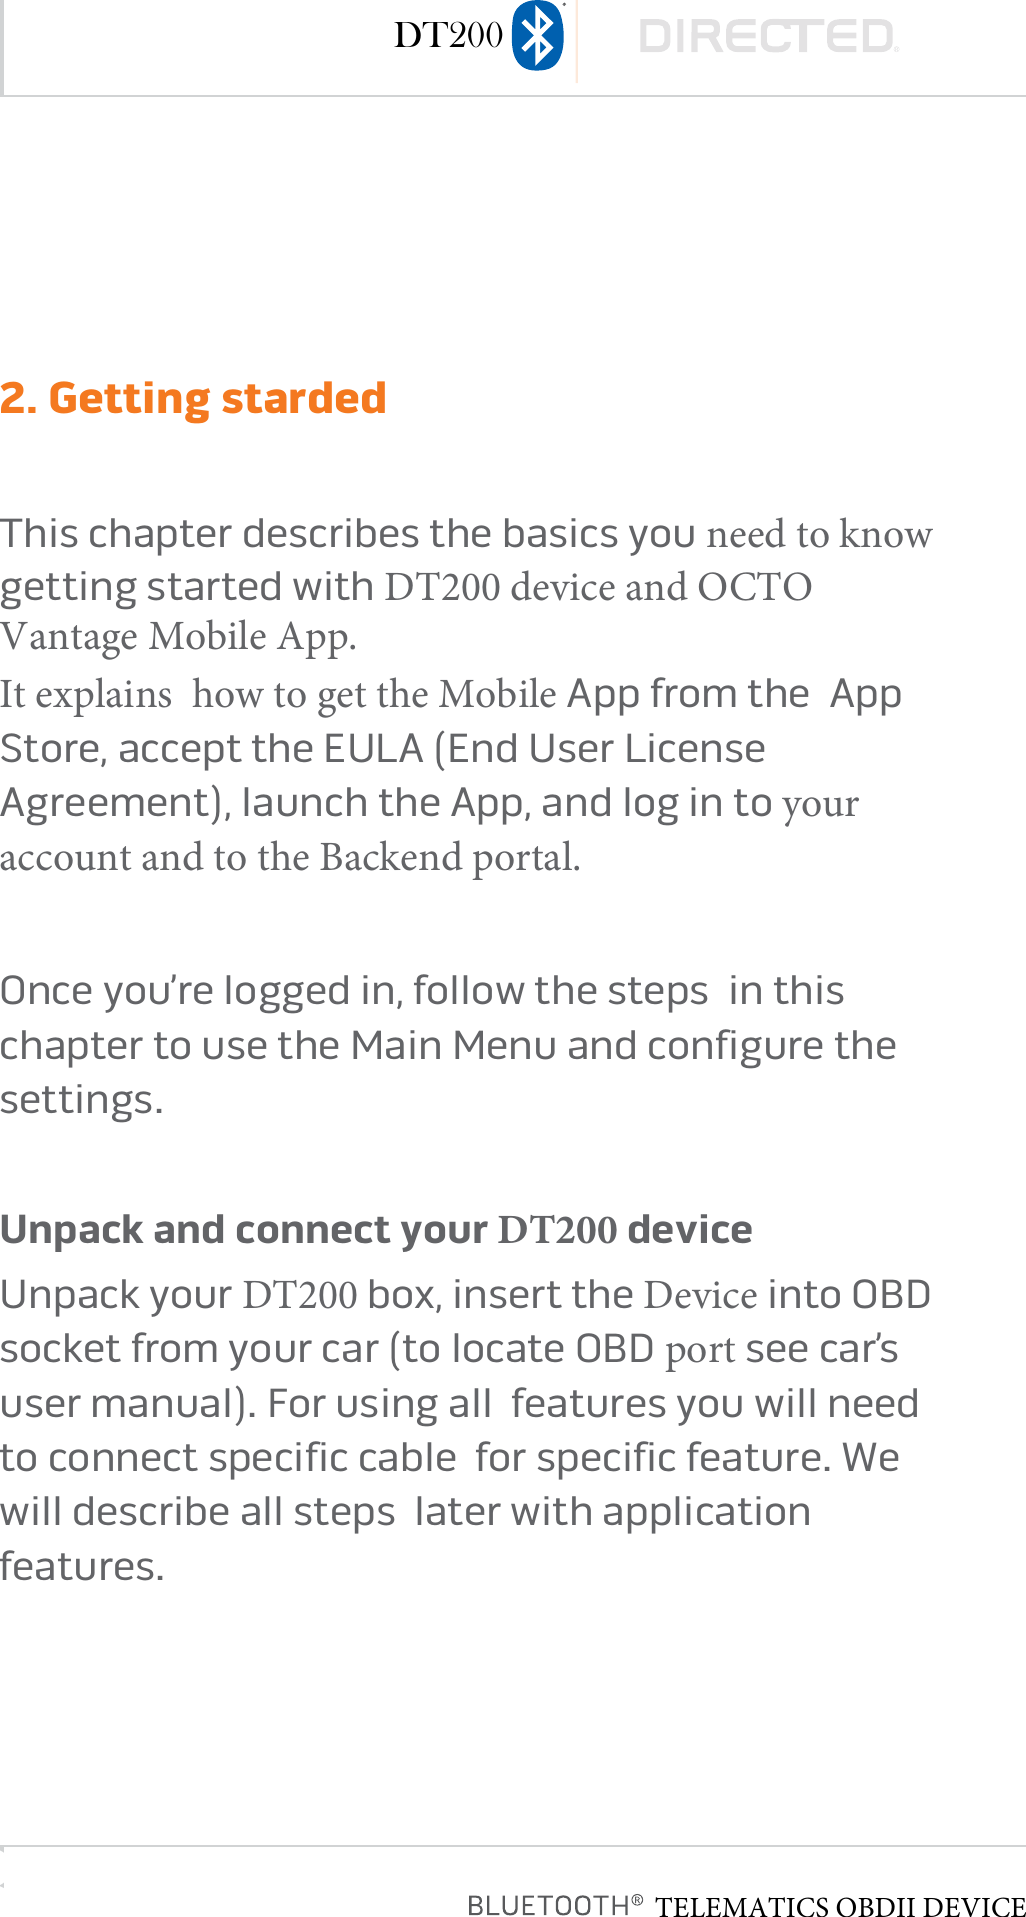 page 82. Getting stardedThis chapter describes the basics you need to know  getting started with DT200 device and OCTO Vantage Mobile App. It explains  how to get the Mobile App from the  App Store, accept the EULA (End User License Agreement), launch the App, and log in to your account and to the Backend portal.Once you’re logged in, follow the steps  in this chapter to use the Main Menu and configure the settings�  Unpack and connect your DT200 deviceUnpack your DT200 box, insert the Device into OBD socket from your car (to locate OBD port see car’s user manual)� For using all  features you will need to connect specific cable  for specific feature� We will describe all steps  later with application features�TELEMATICS OBDII DEVICEDT200